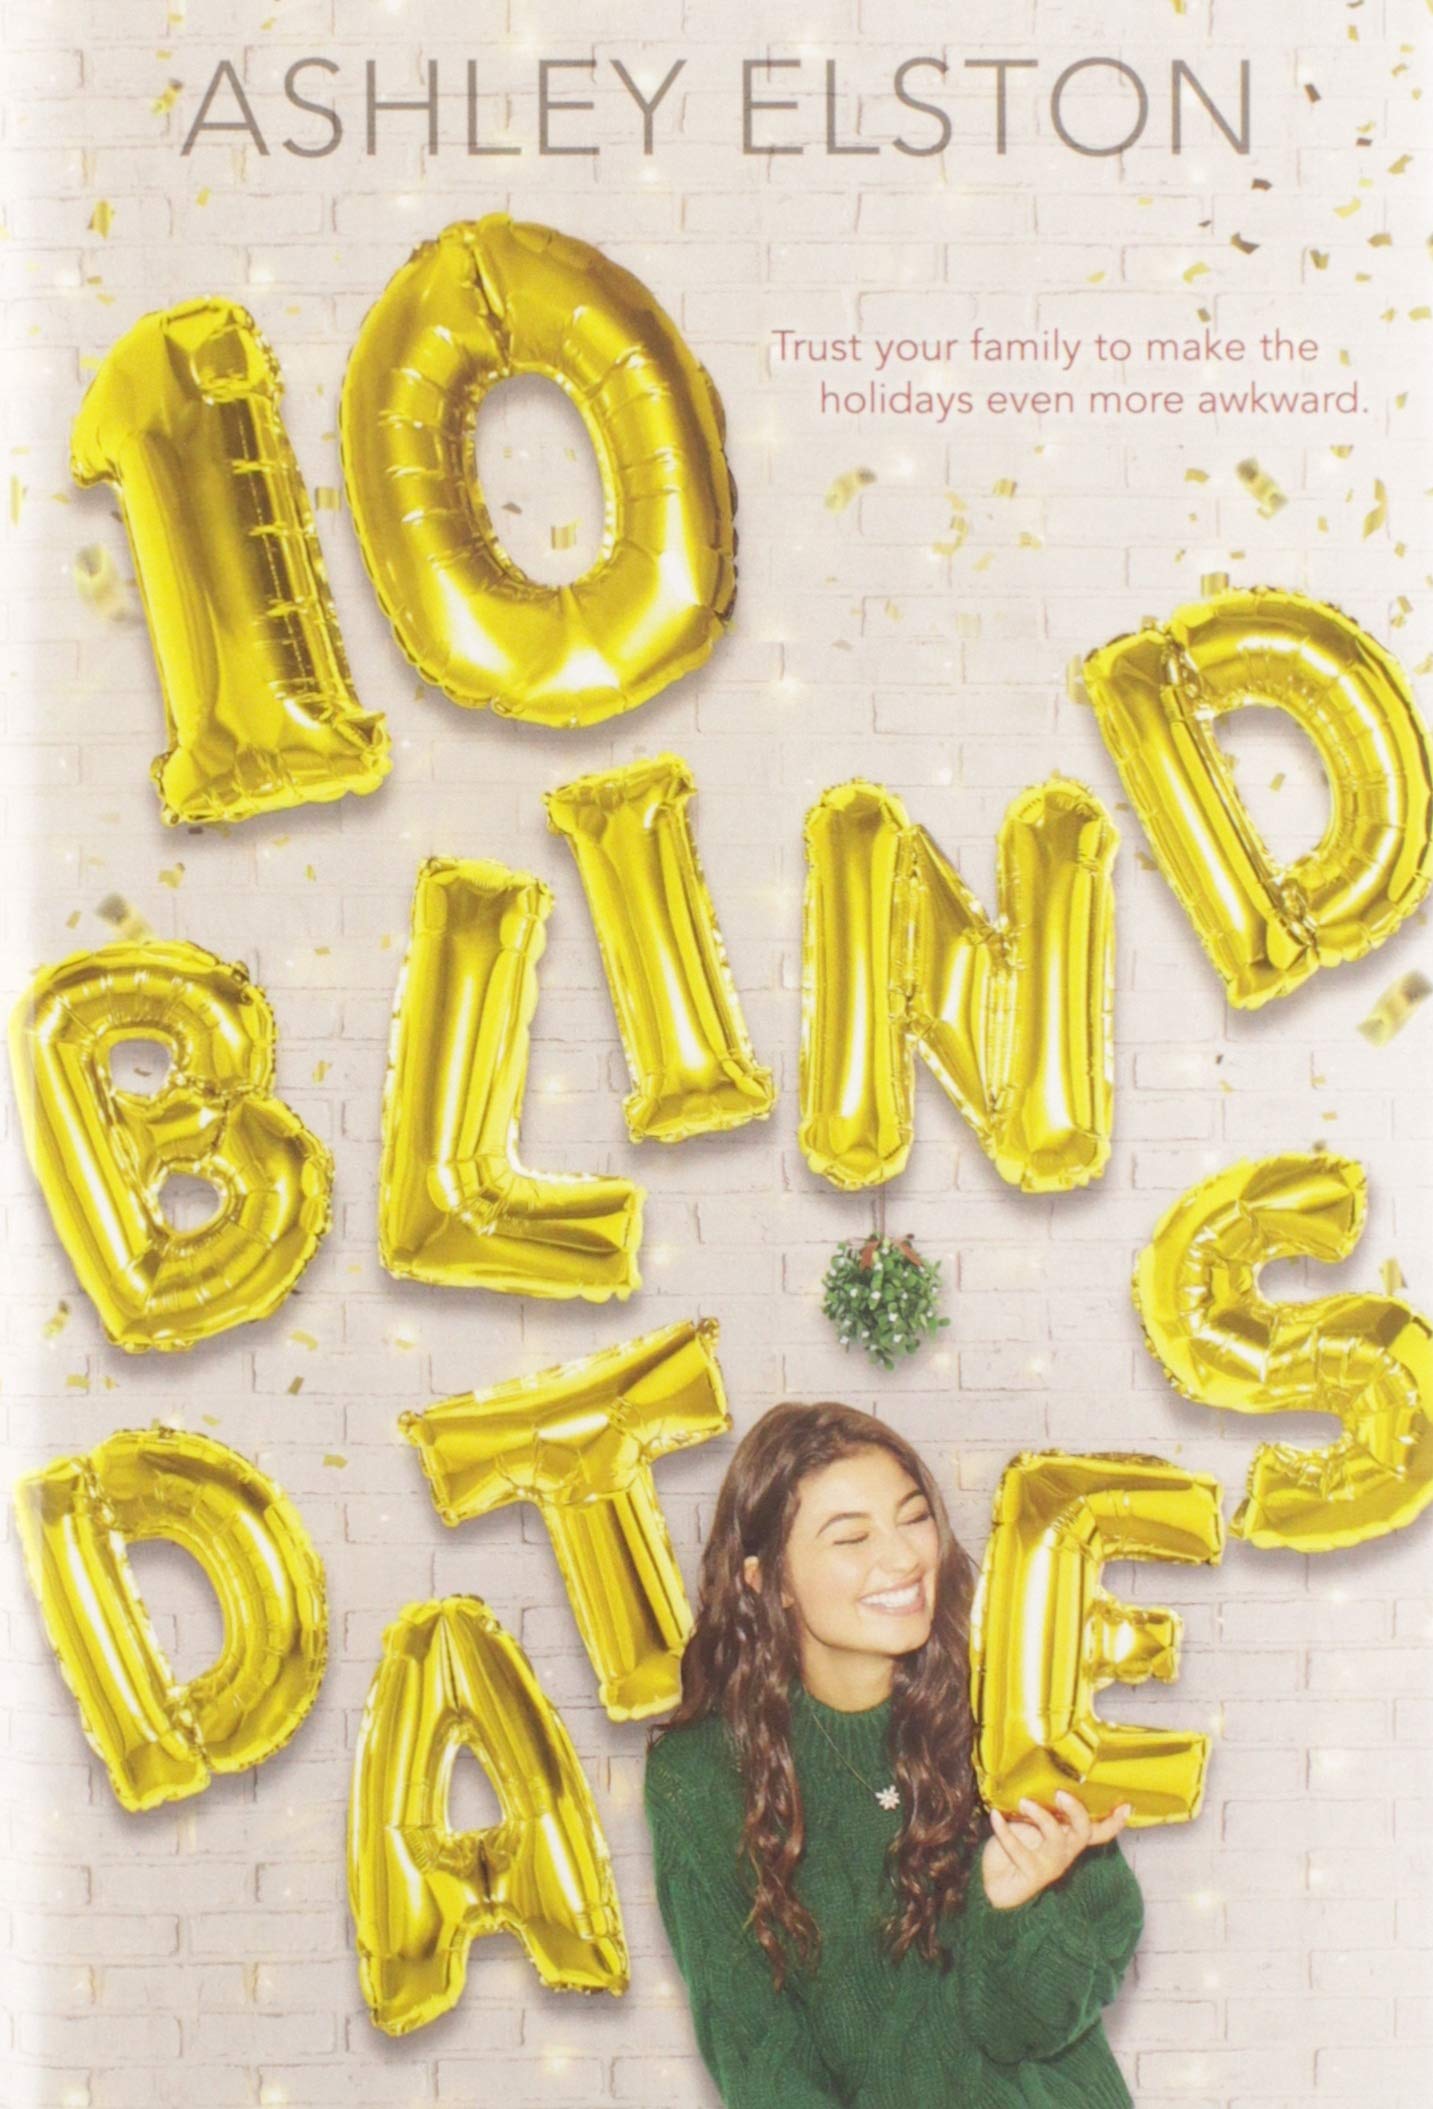 Book Cover for "10 Blind Dates"